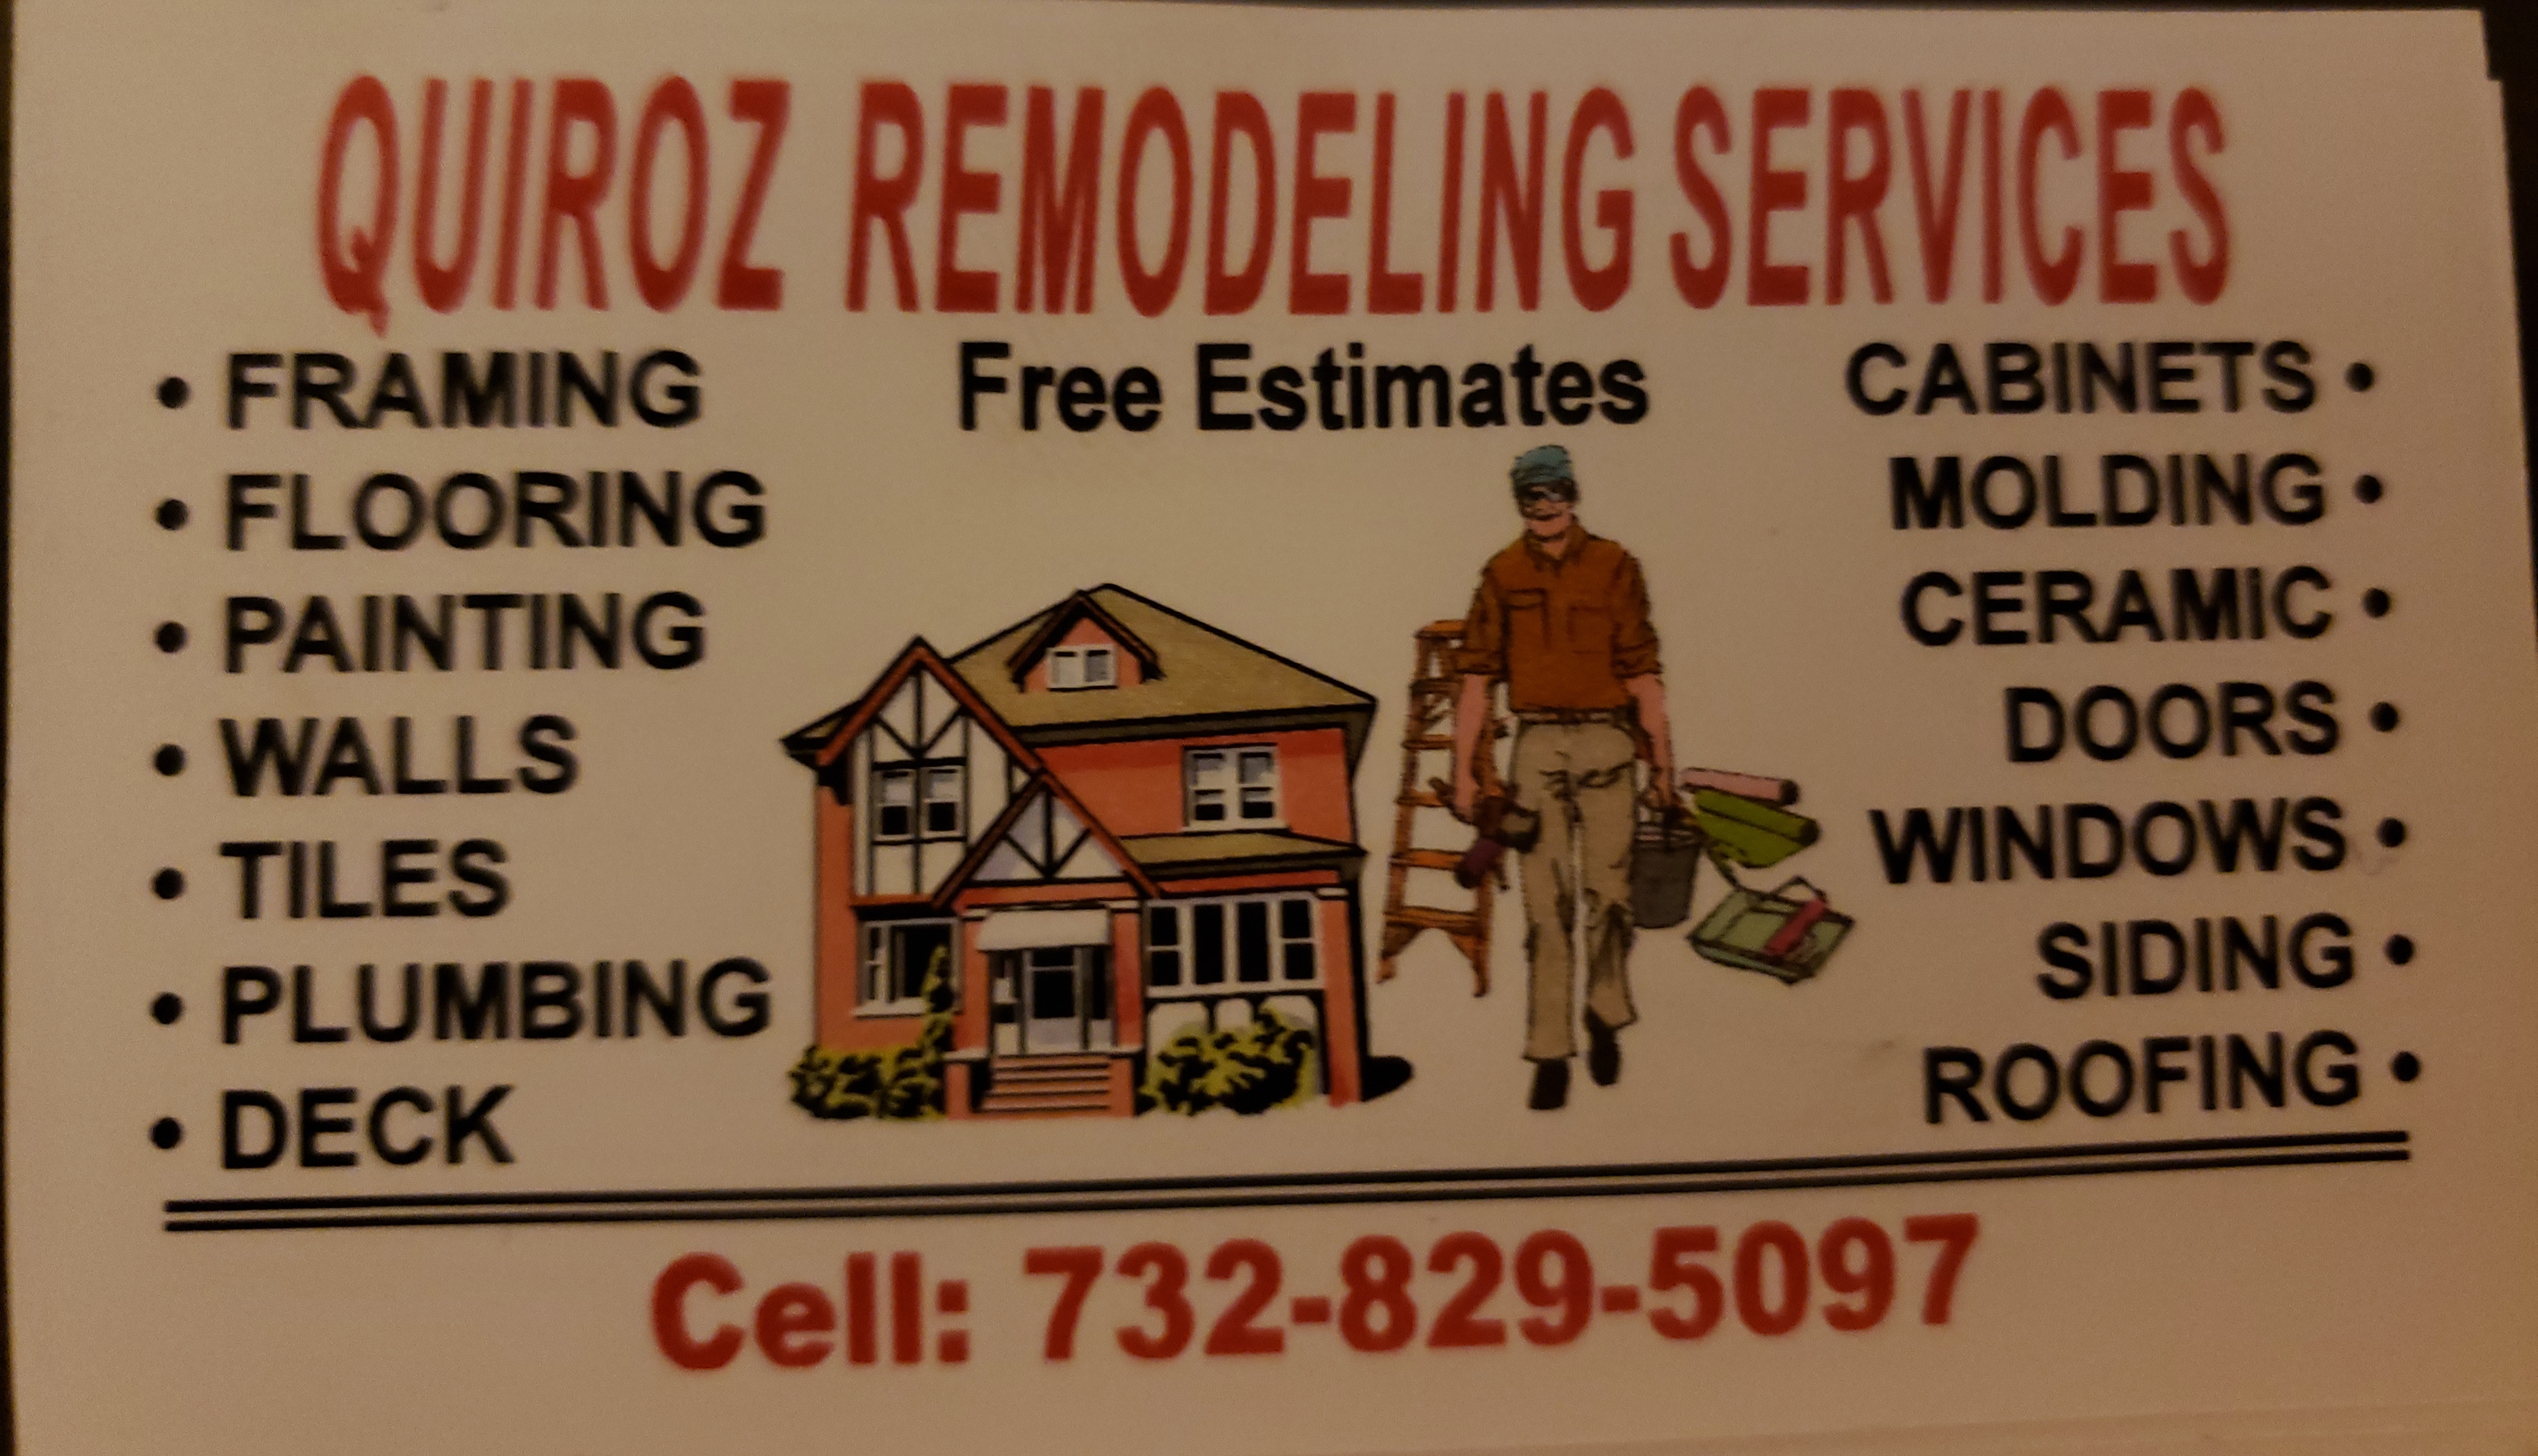 Quiroz Remodeling Services Logo